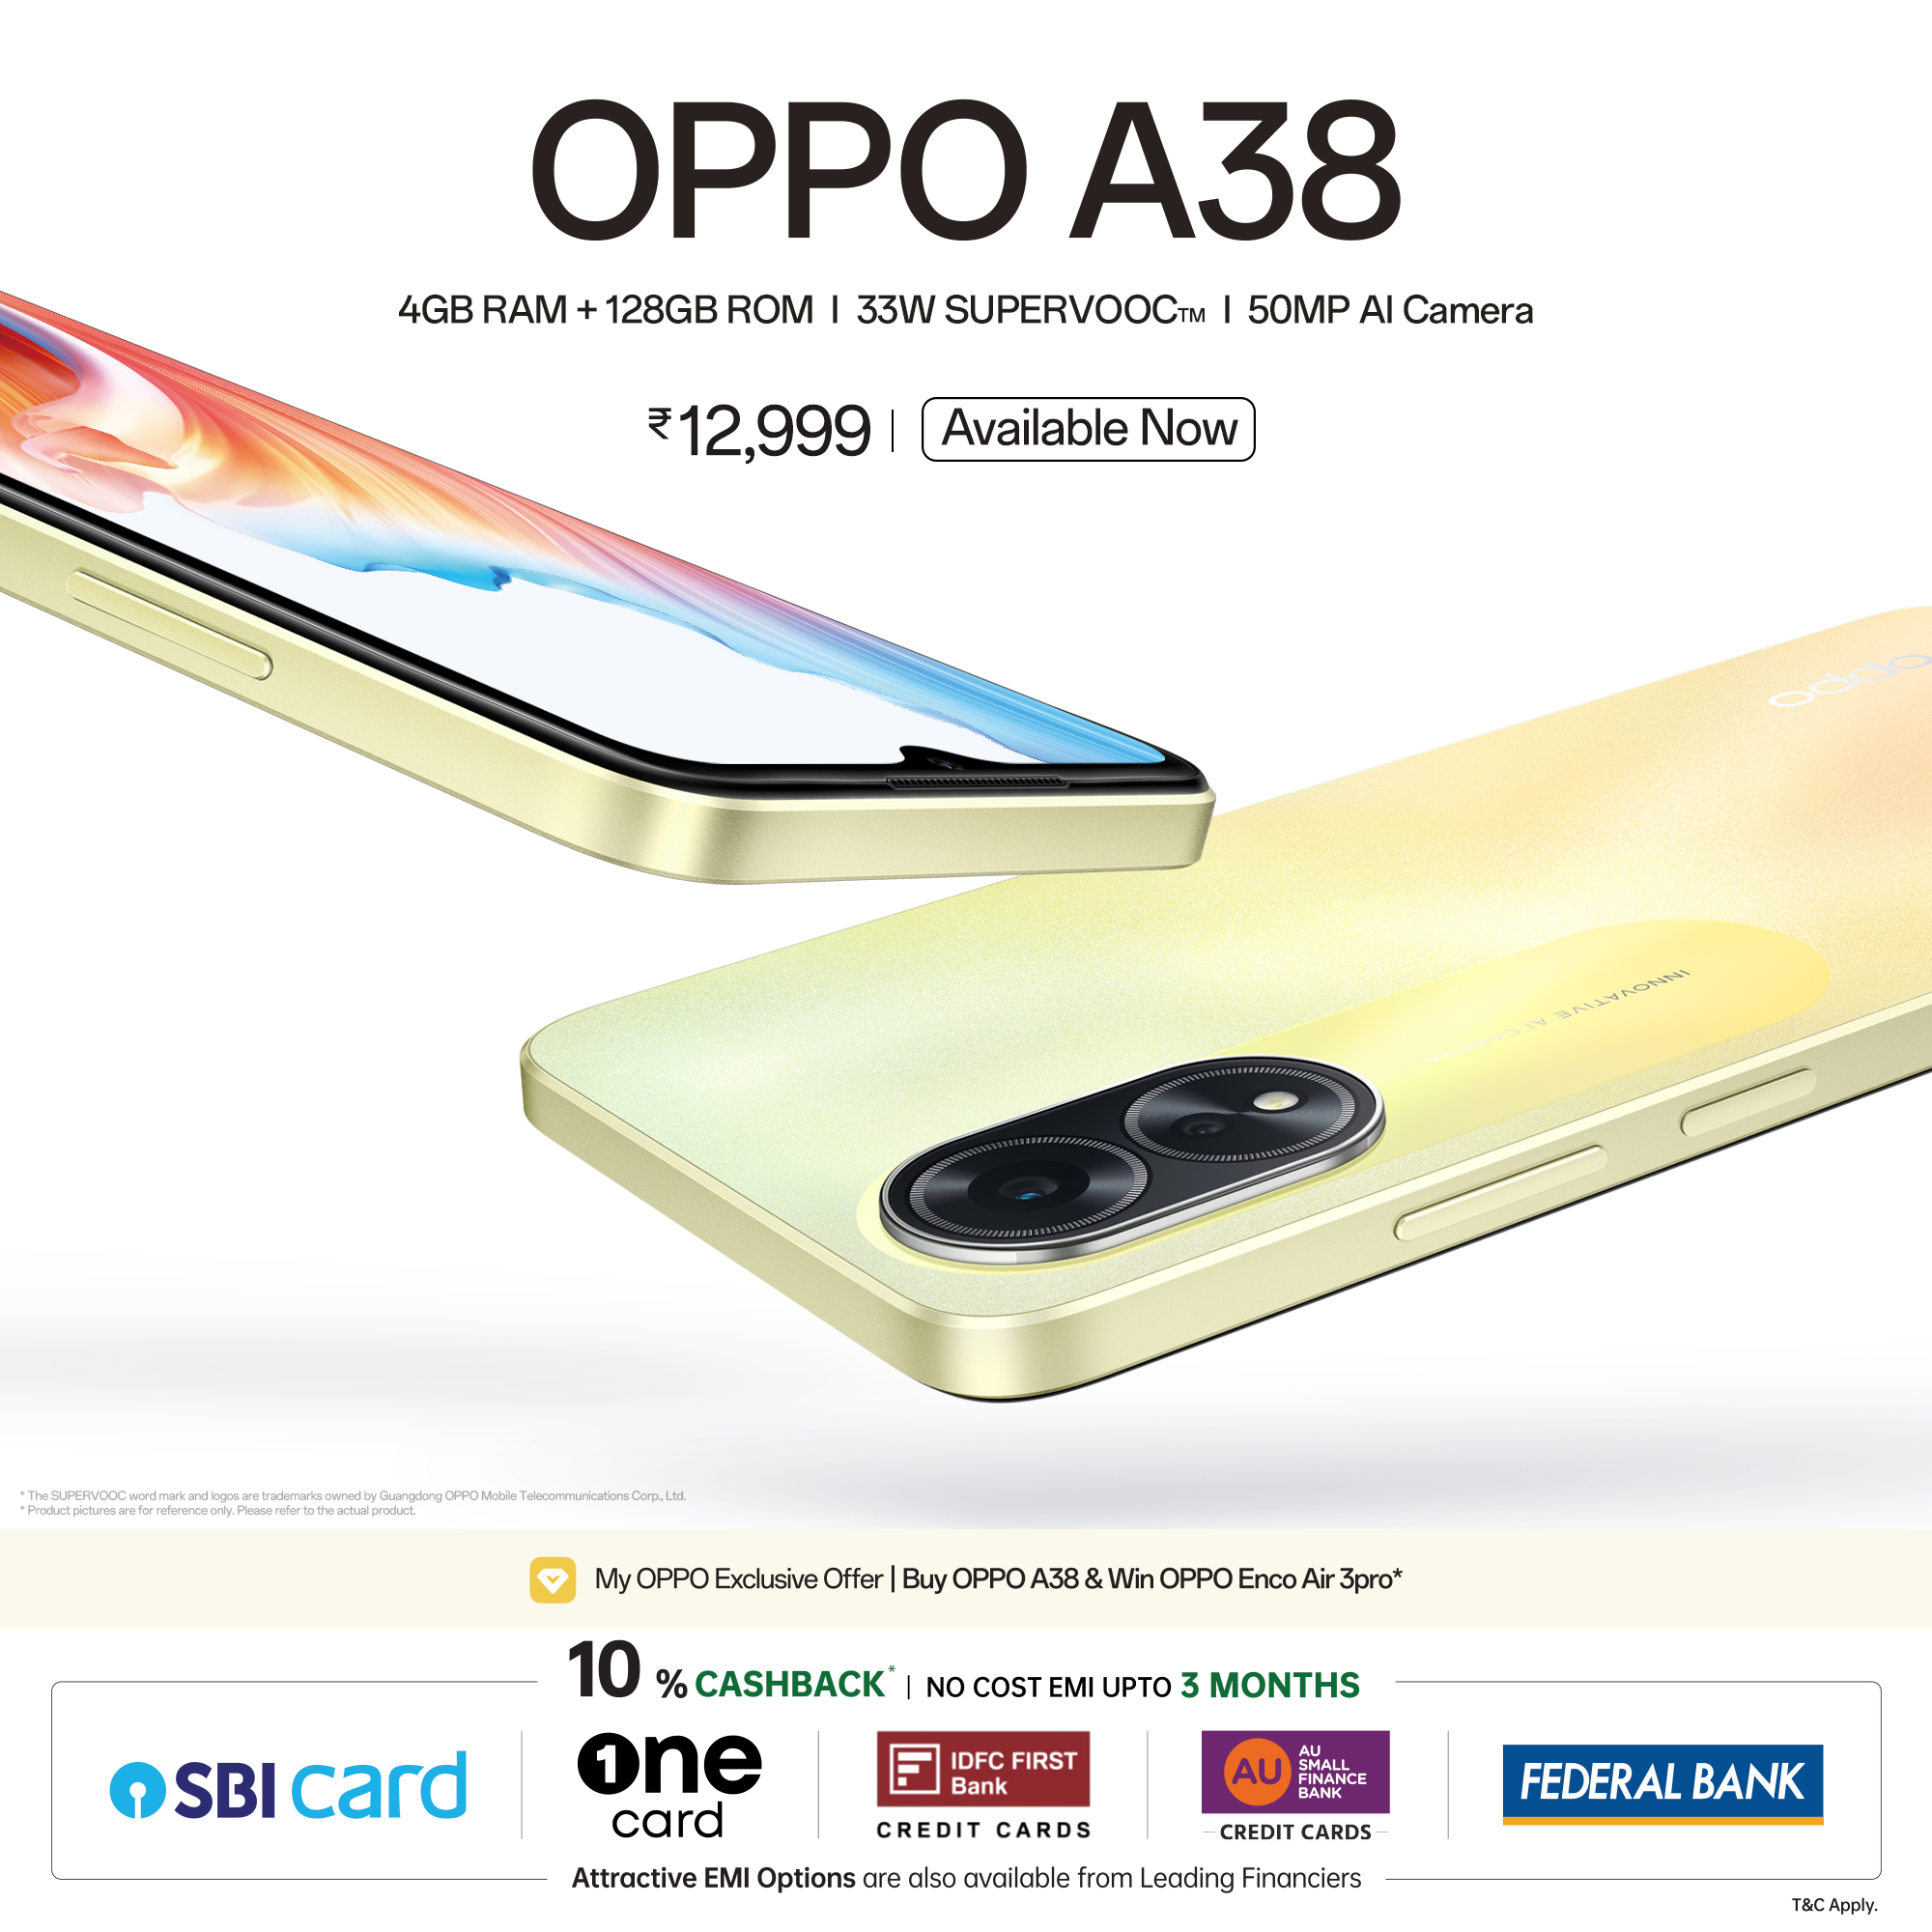 OPPO India on X: Get ready to elevate your mobile experience! Launching OPPO  A38, at just Rs.12,999 Experience the power of 4GB RAM + 128GB ROM, capture  brilliance with the 50MP AI